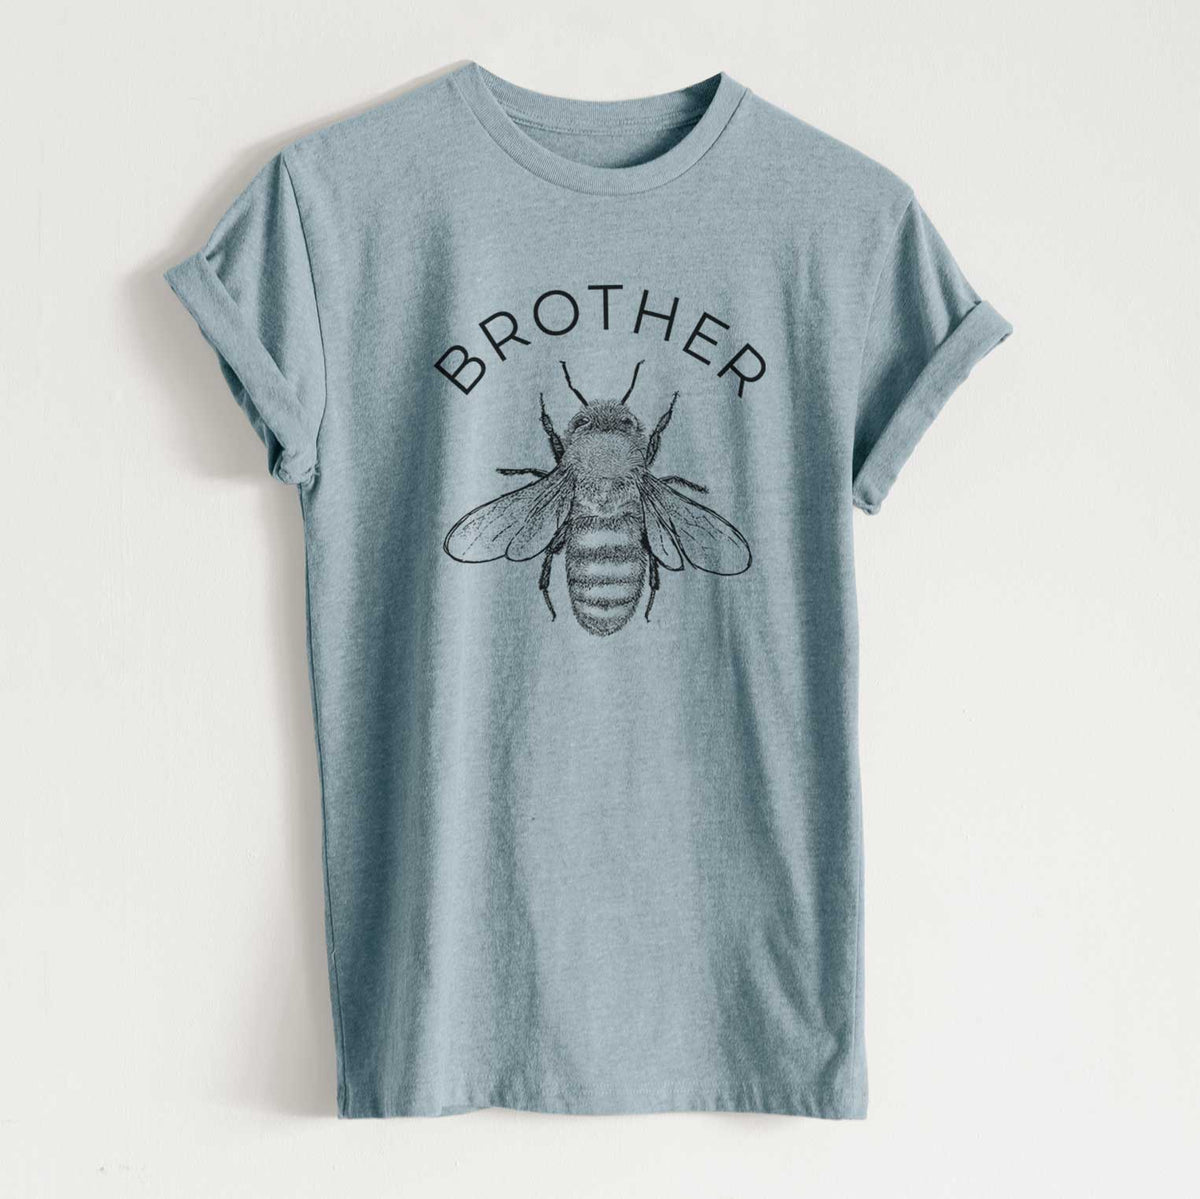 Brother Bee - Unisex Recycled Eco Tee  - CLOSEOUT - FINAL SALE